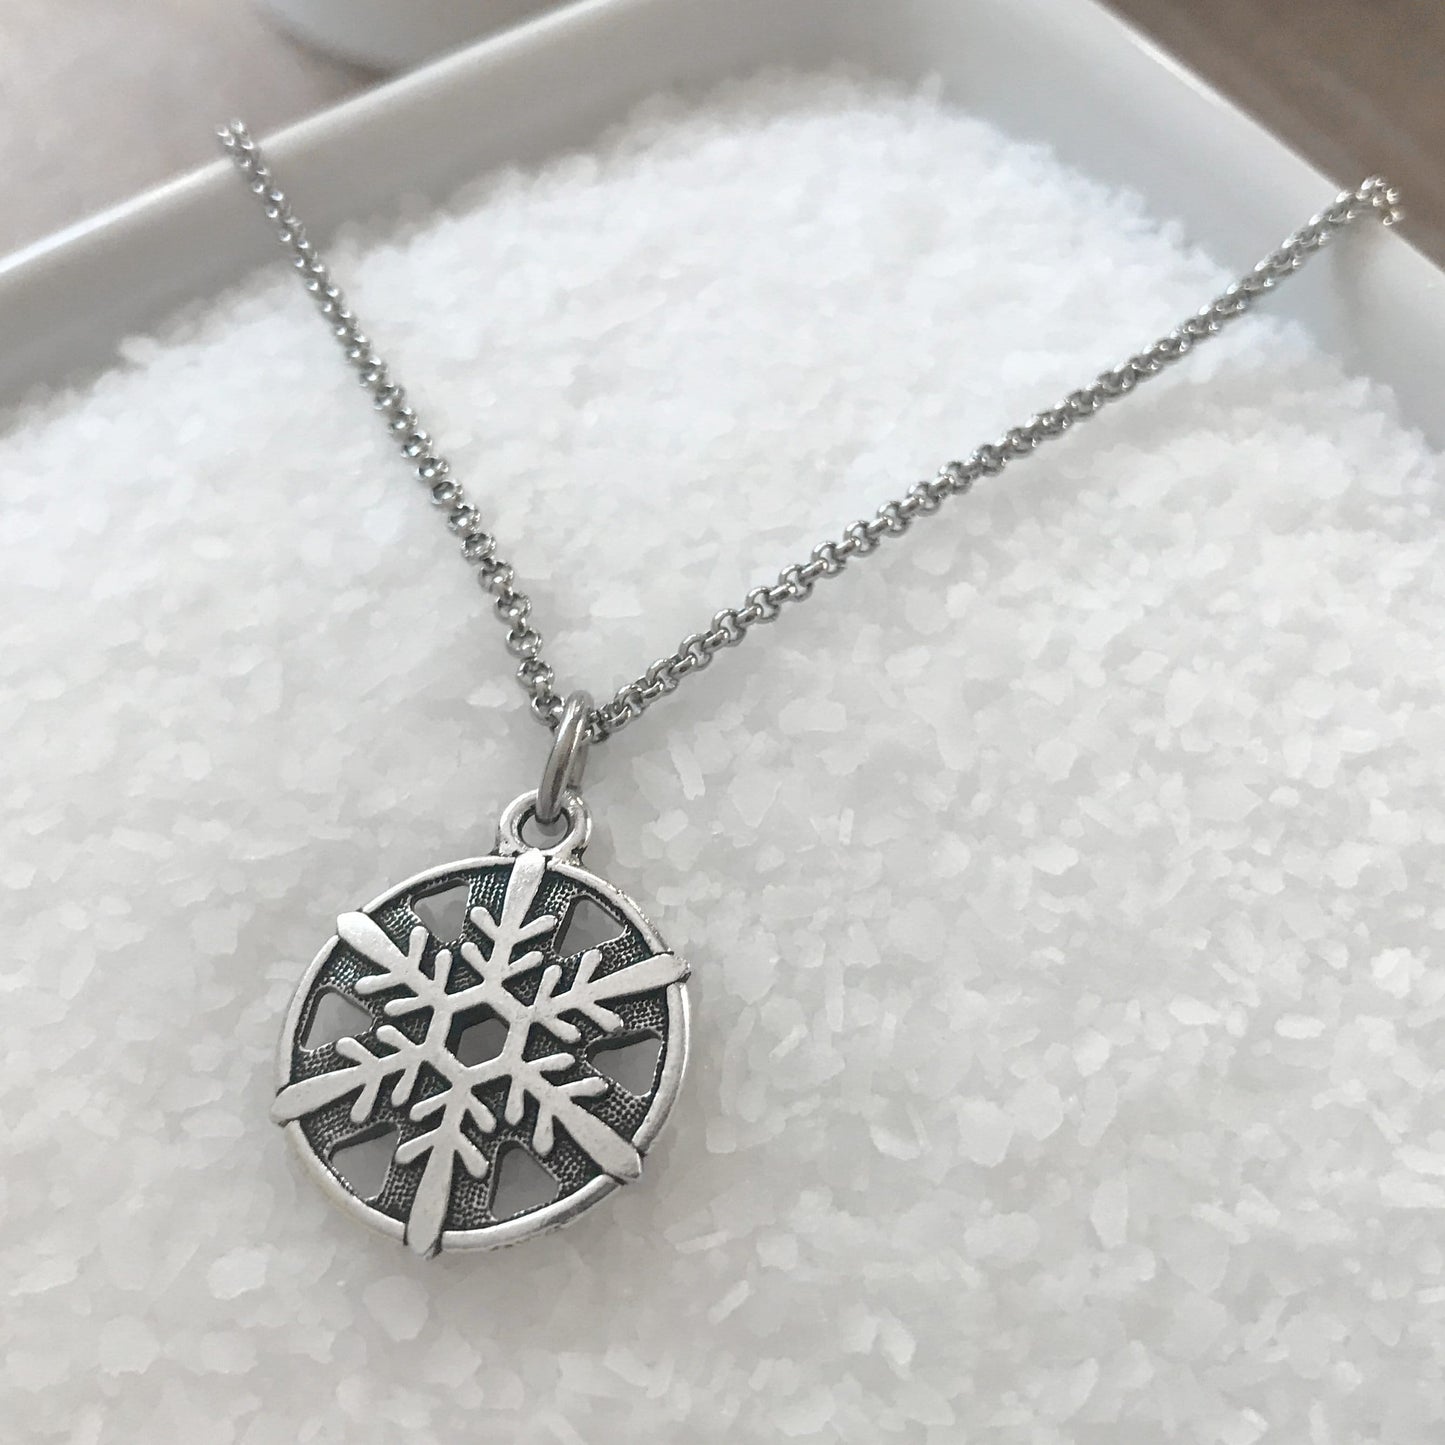 Small Antique Silver Snowflake Charm Necklace, Winter Gifts for Women, Round Pendant, Stainless Steel Necklace Chain